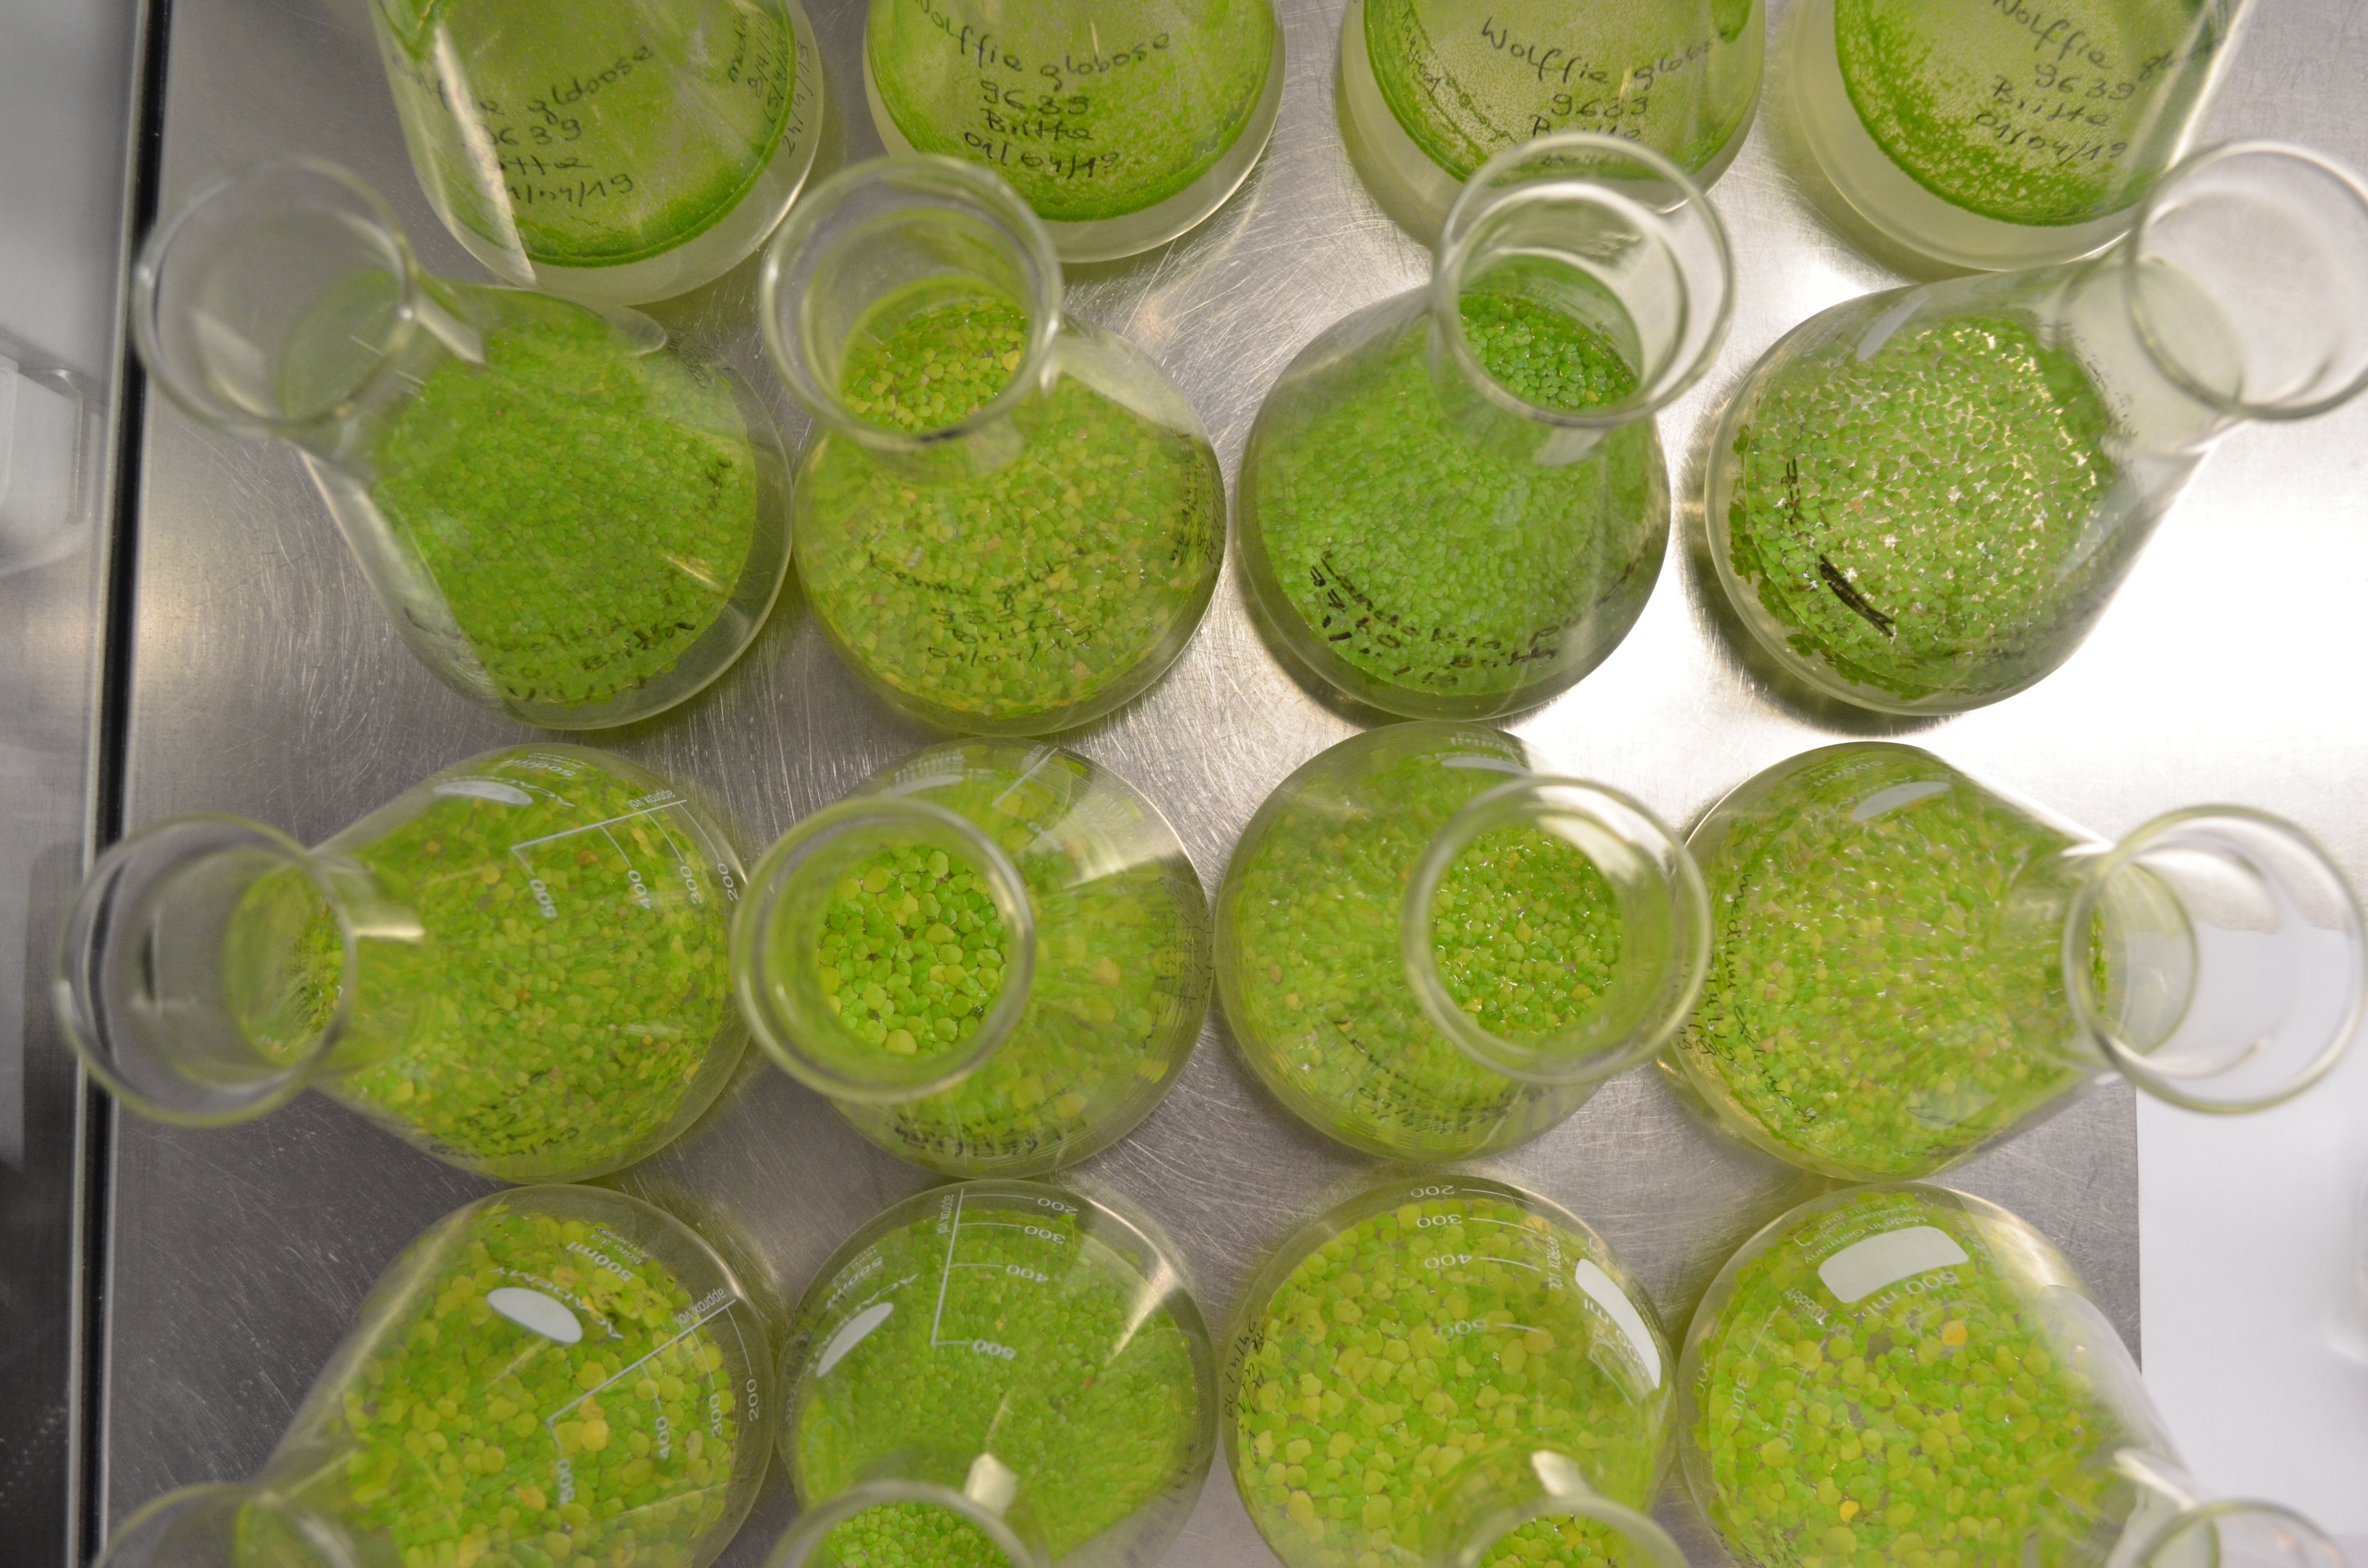 A collection of scientific glass jars with duckweeds growing in water